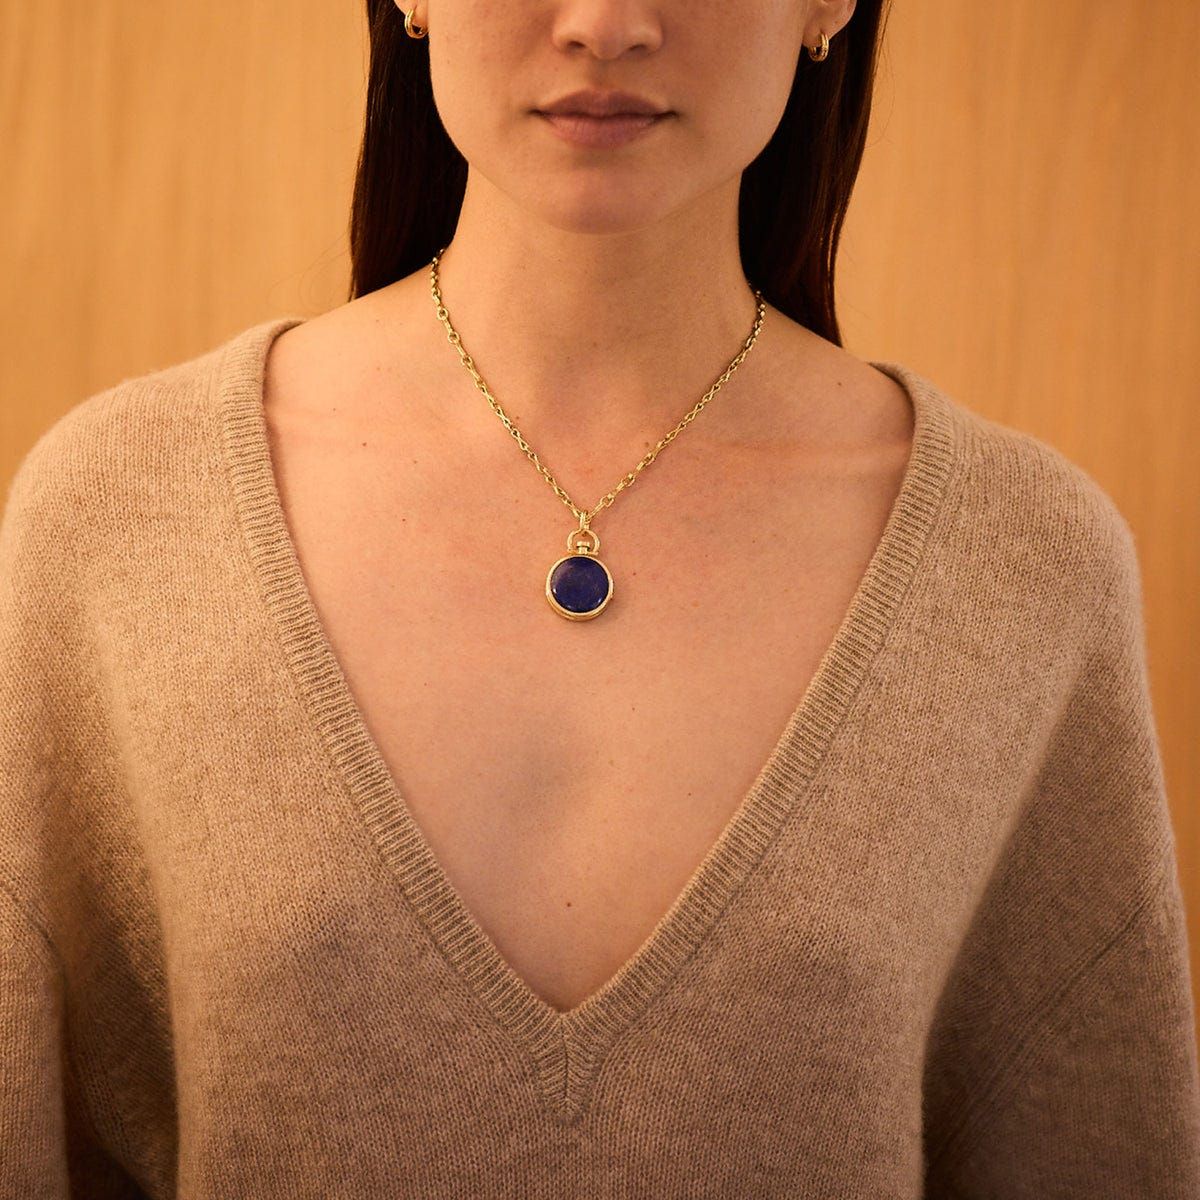 Gemstone Bar Necklace in Lapis and Gold is Graphic Delicate Modern